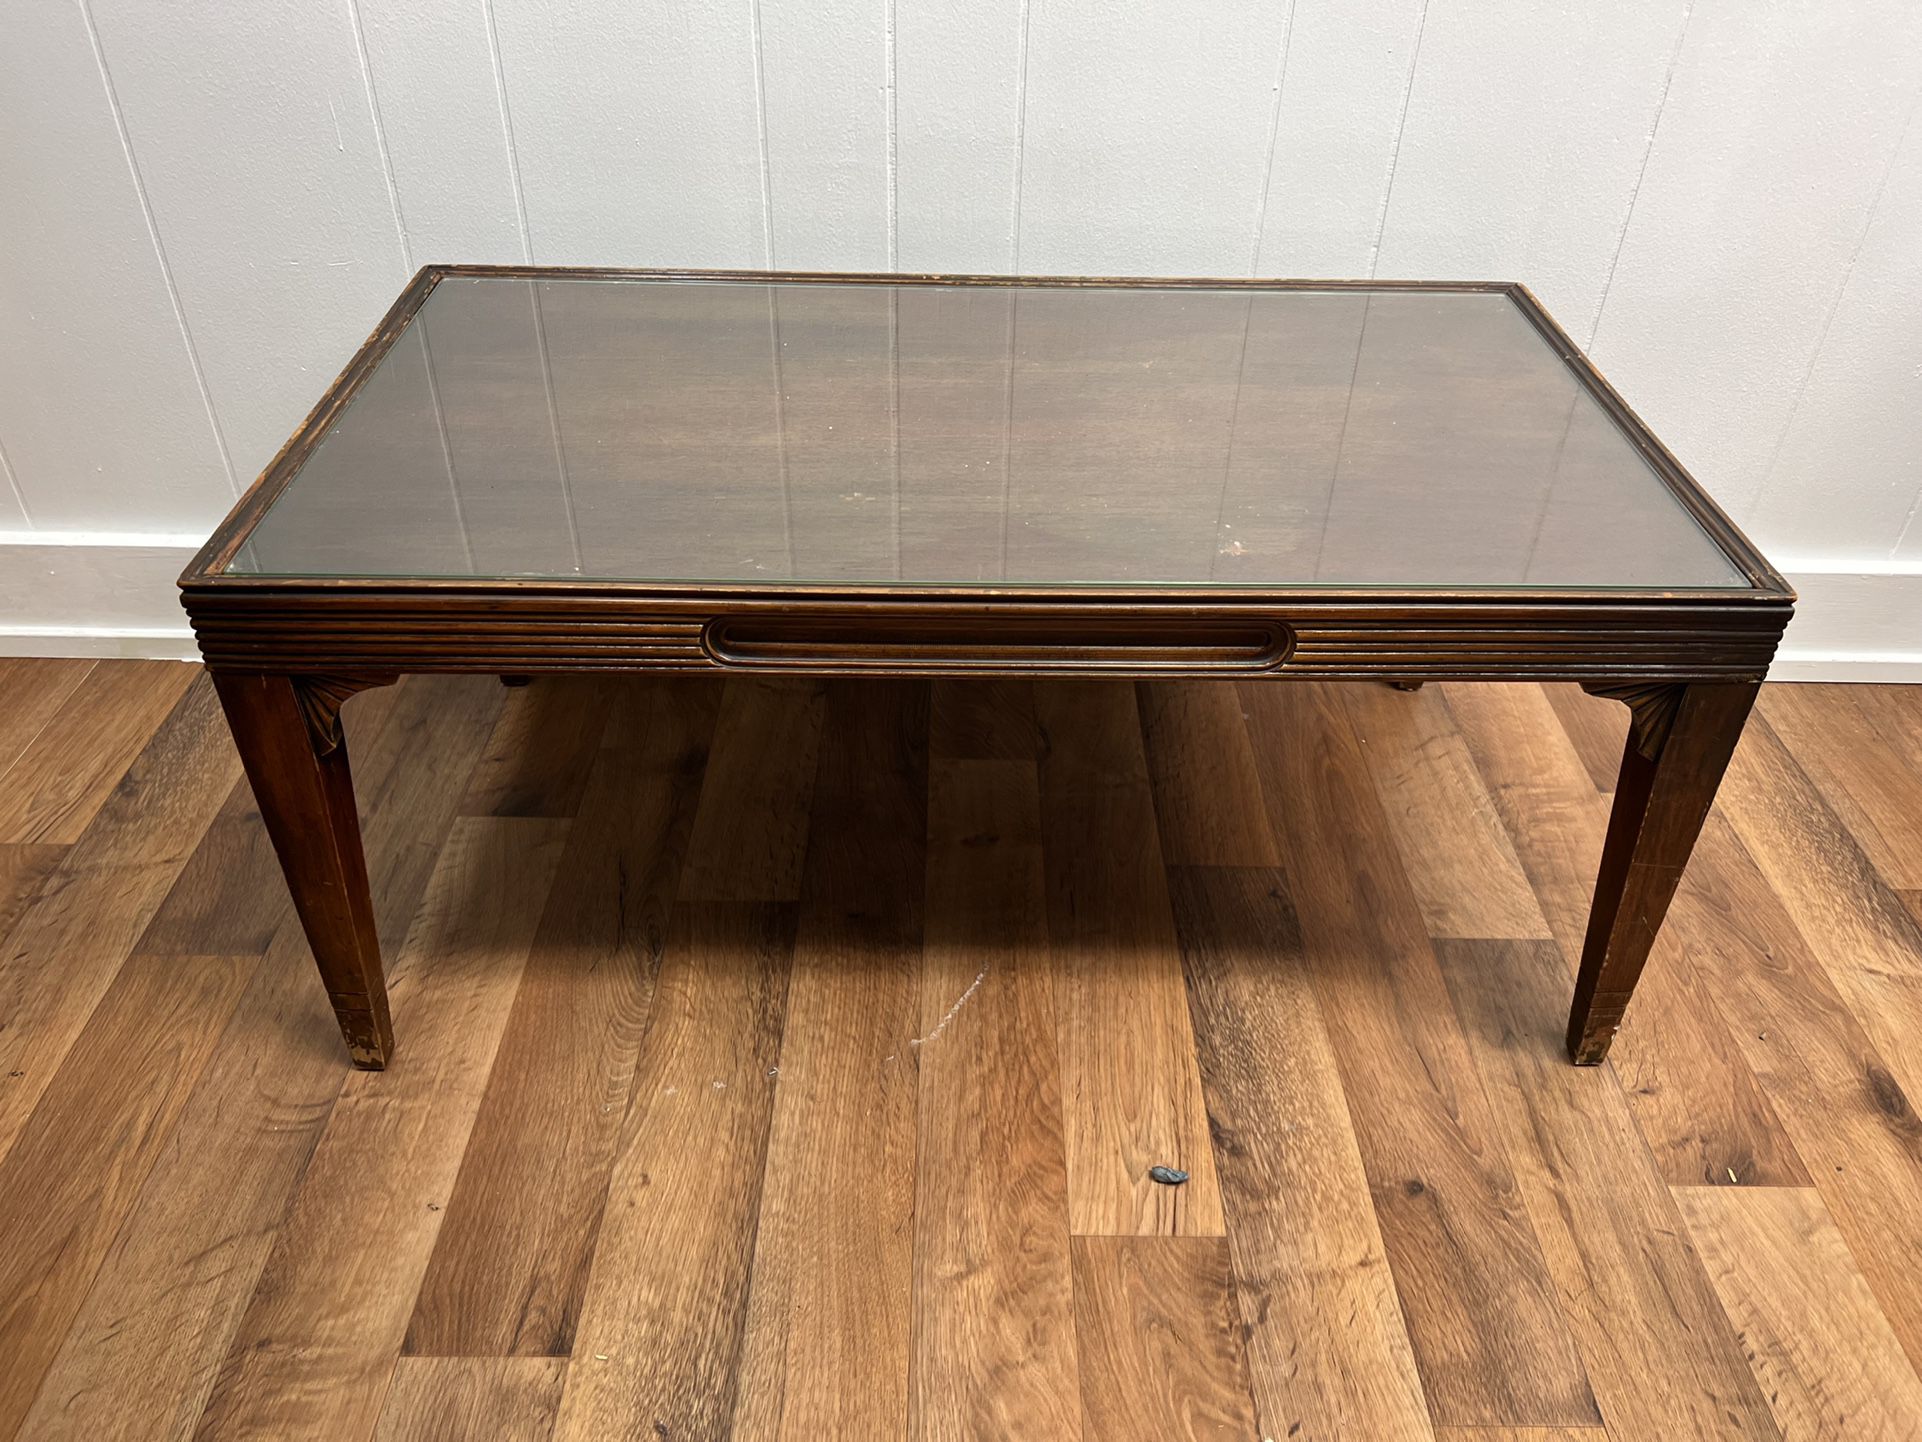 Vintage Glass Topped Coffee Table